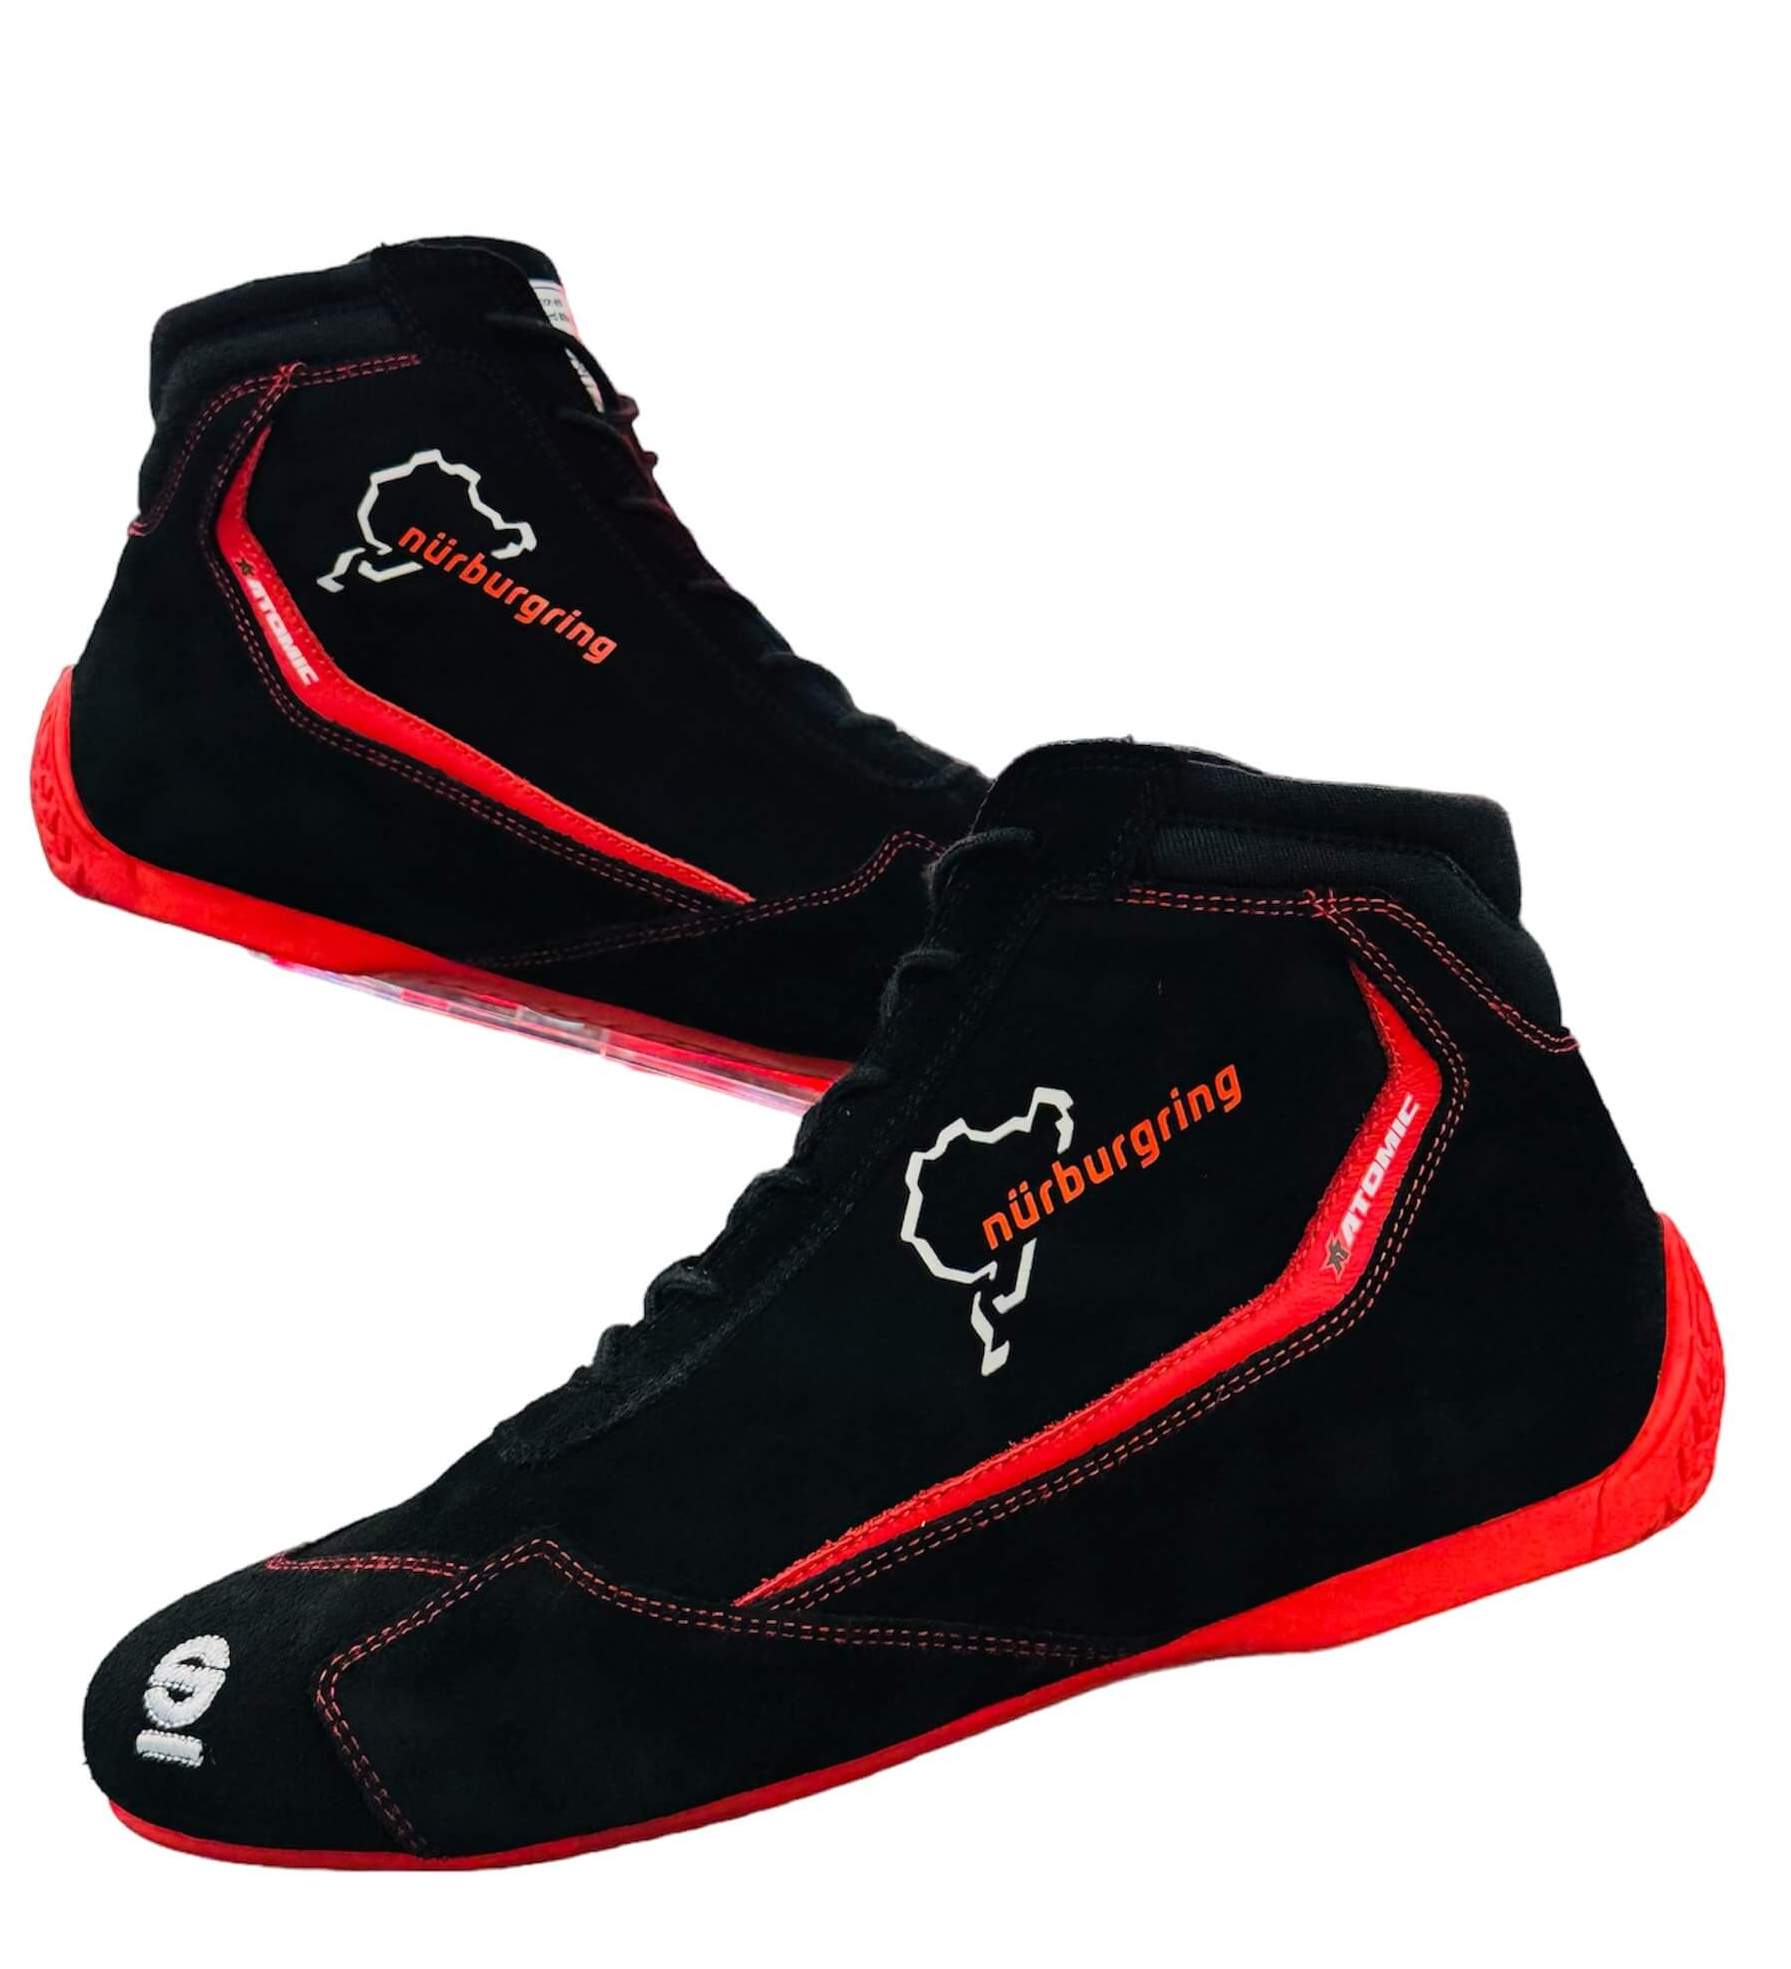 SPARCO 001295SP_NBR41 Shoes Slalom Nurburgring Edition black/red Size 41 Photo-3 